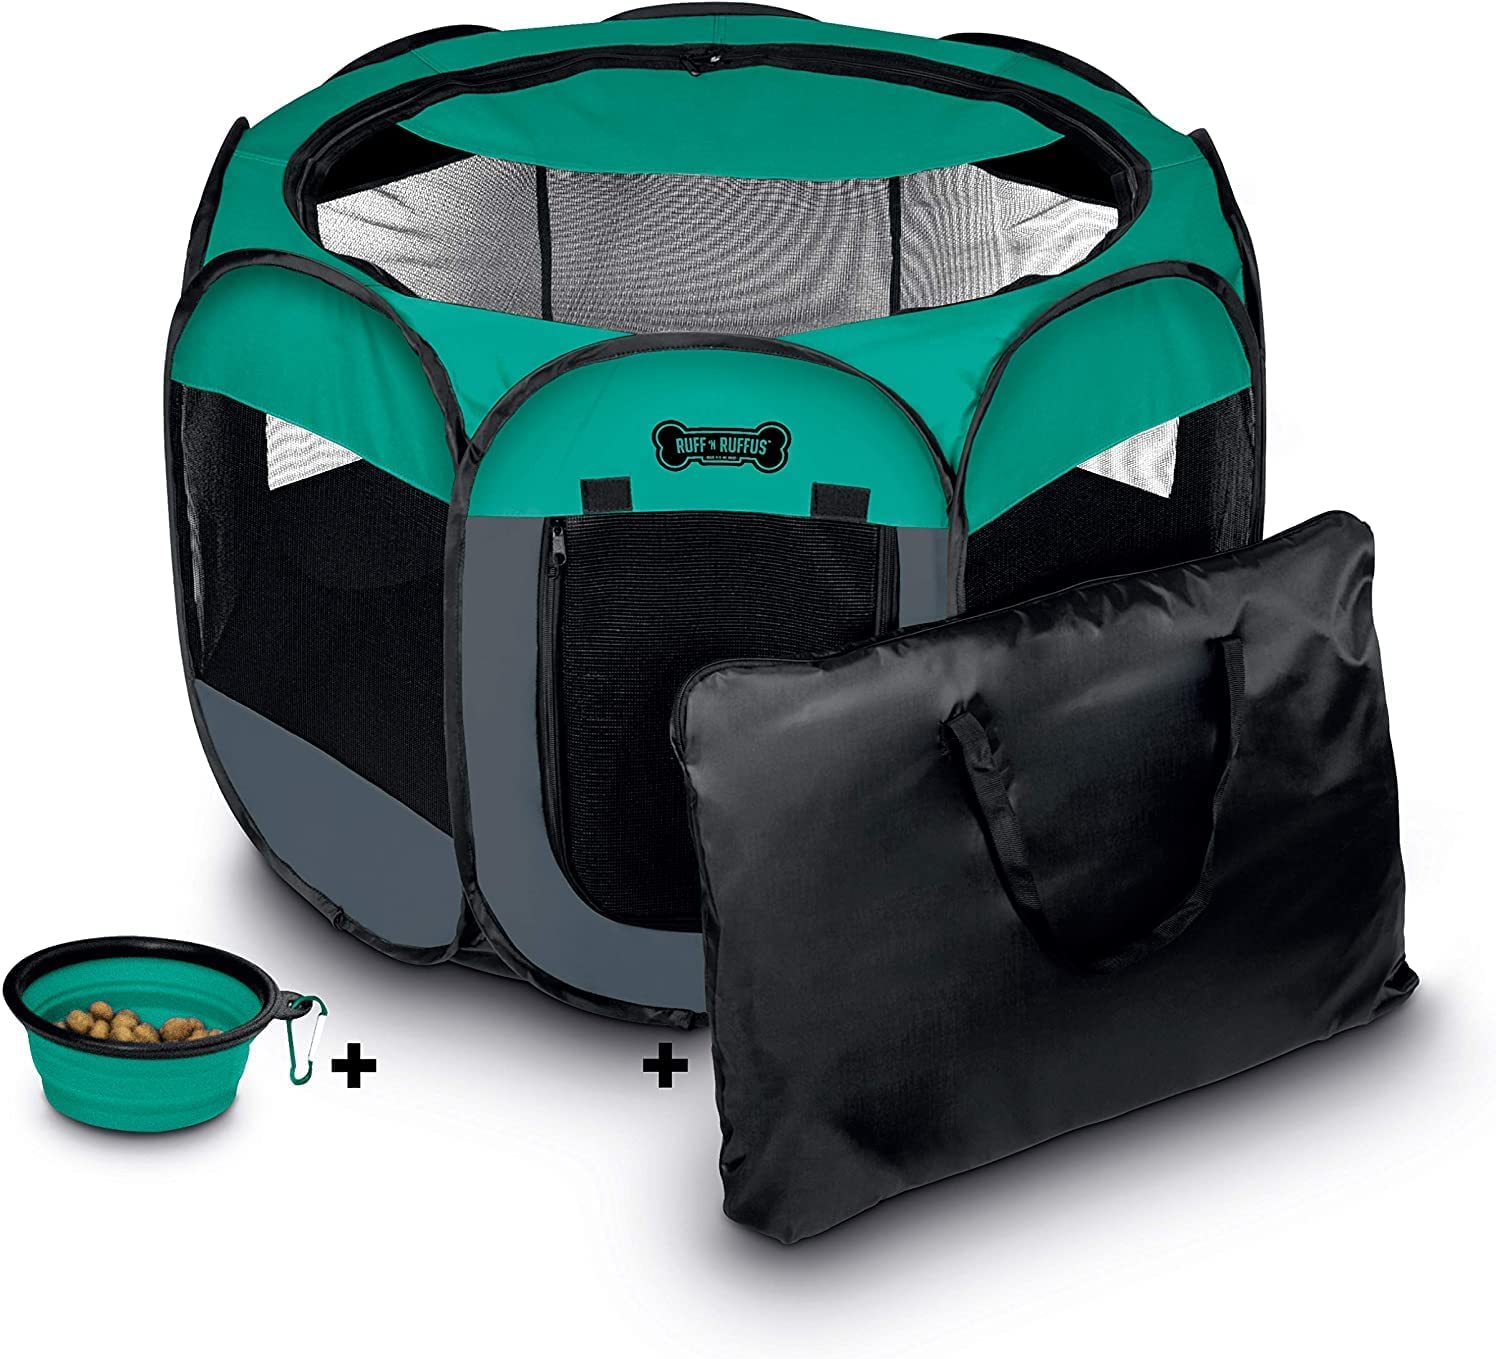 Ruff ‘n Ruffus Removable Shade Top Portable Puppy Playpen